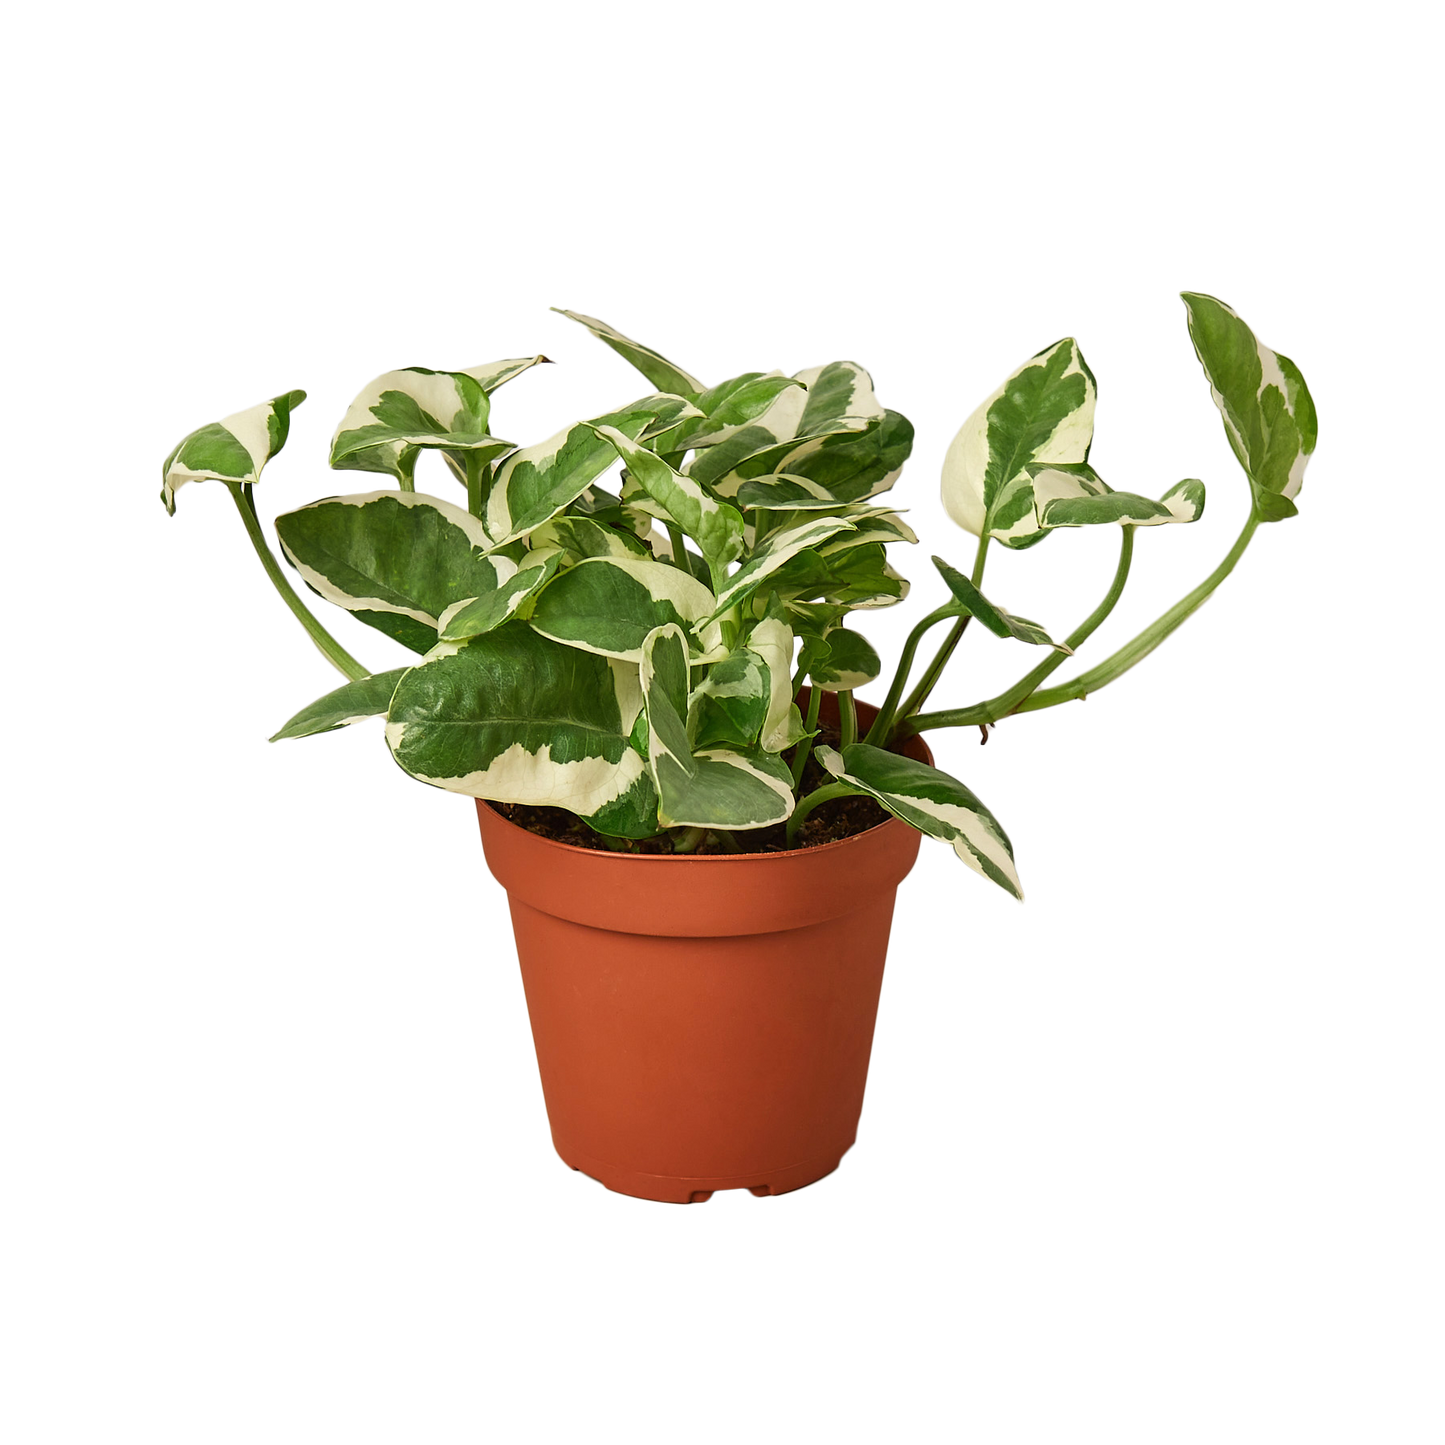 3 Live Pothos Plants Variety Pack - Easy to Care Houseplant Bundle - Air Purifying Plants - 4" Pot - Live Plant - Home and Garden Plants